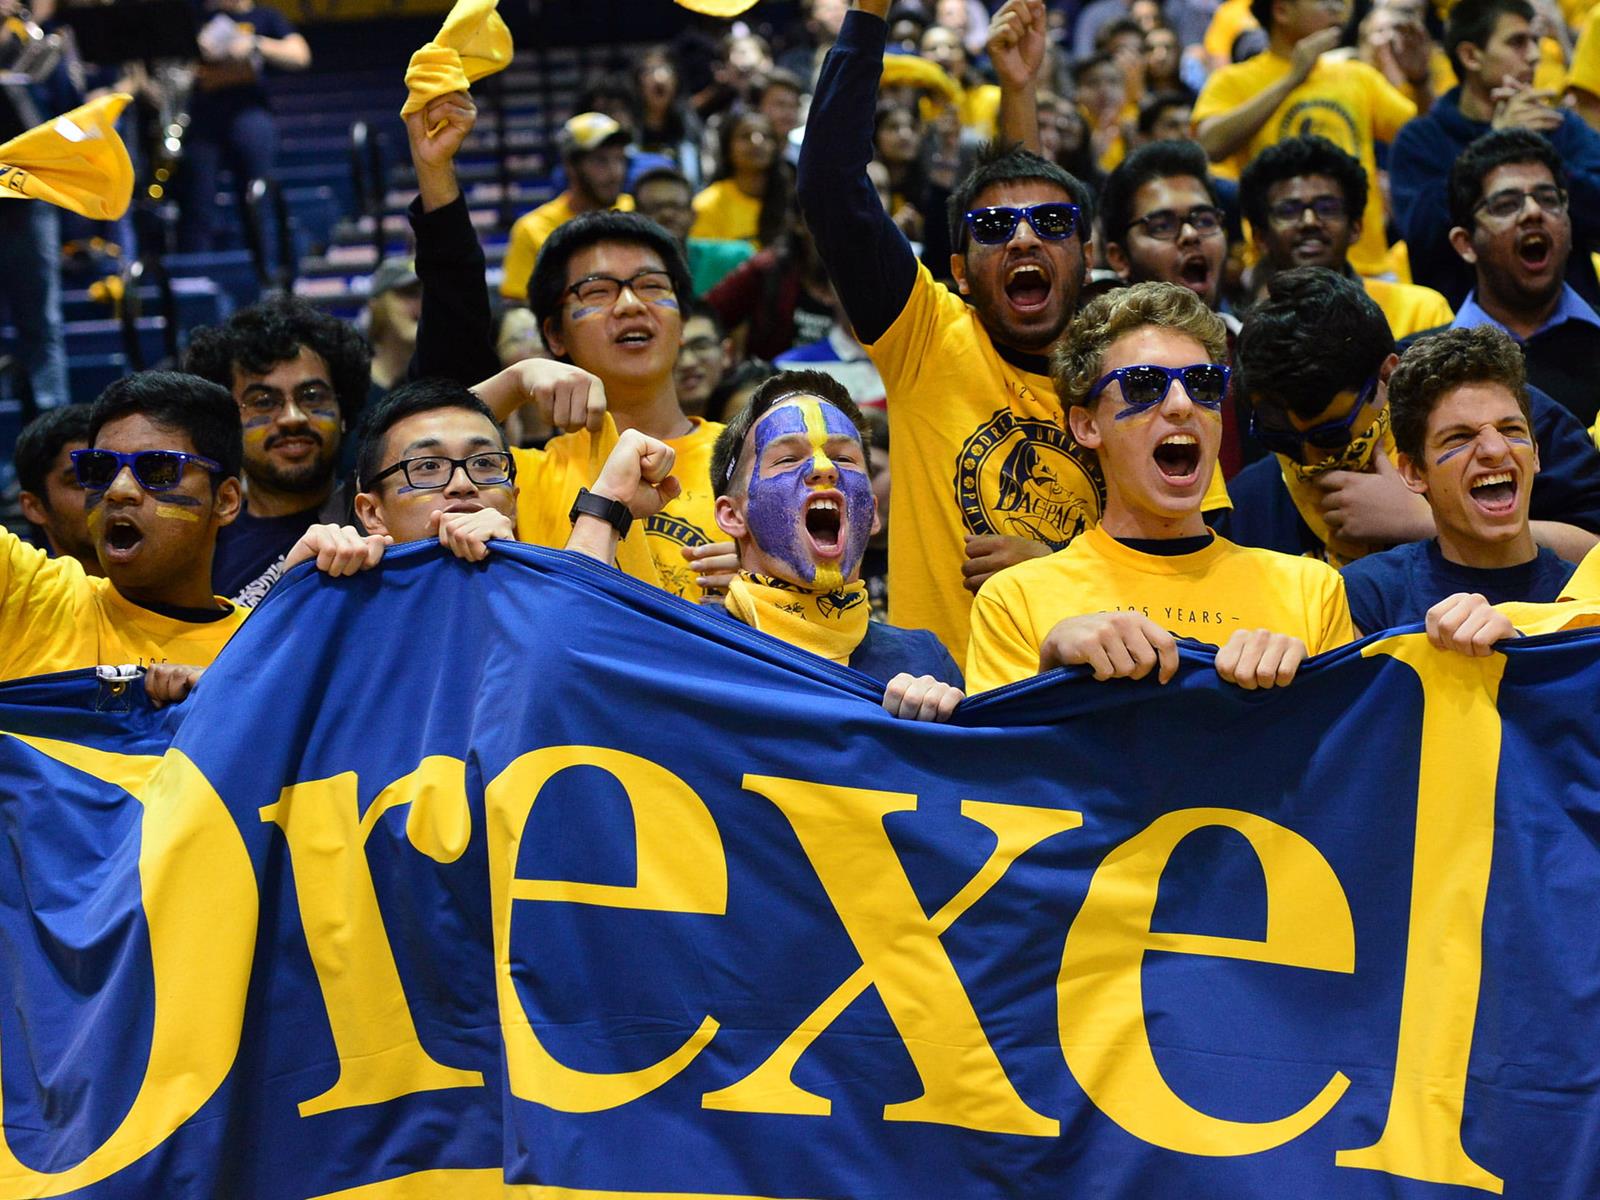 Drexel fans at a sporting event 